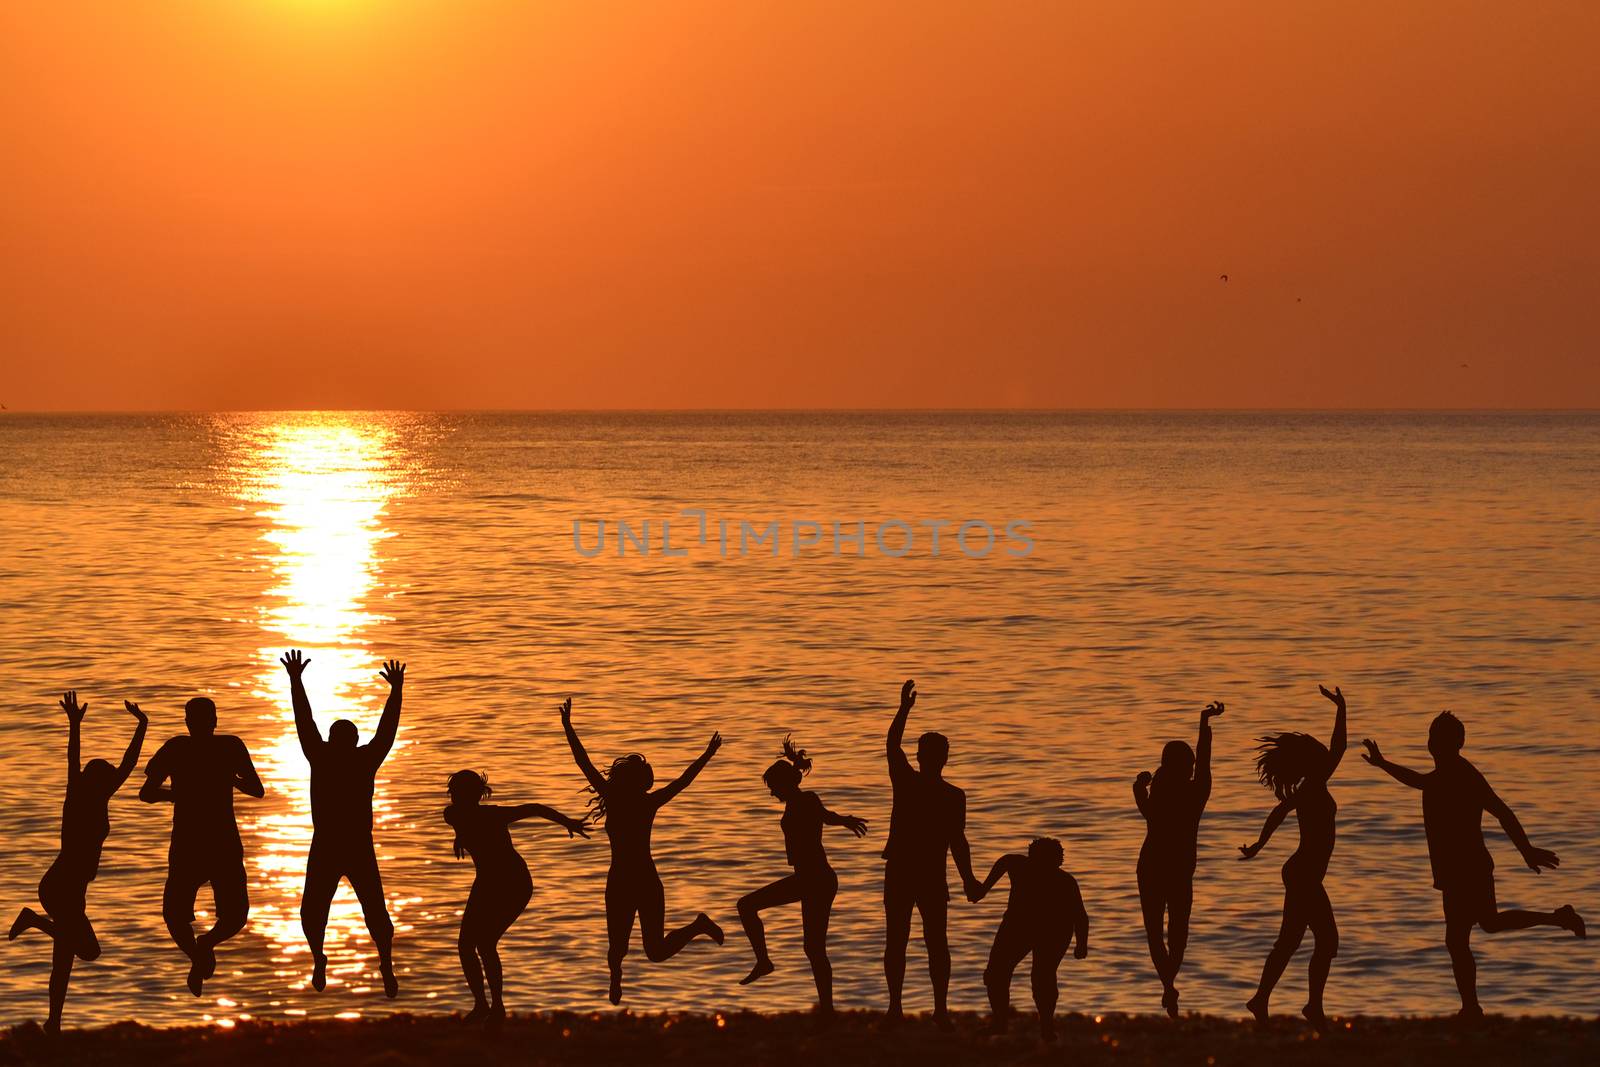 Men and women jumping and enjoying life at sunrise on the beach